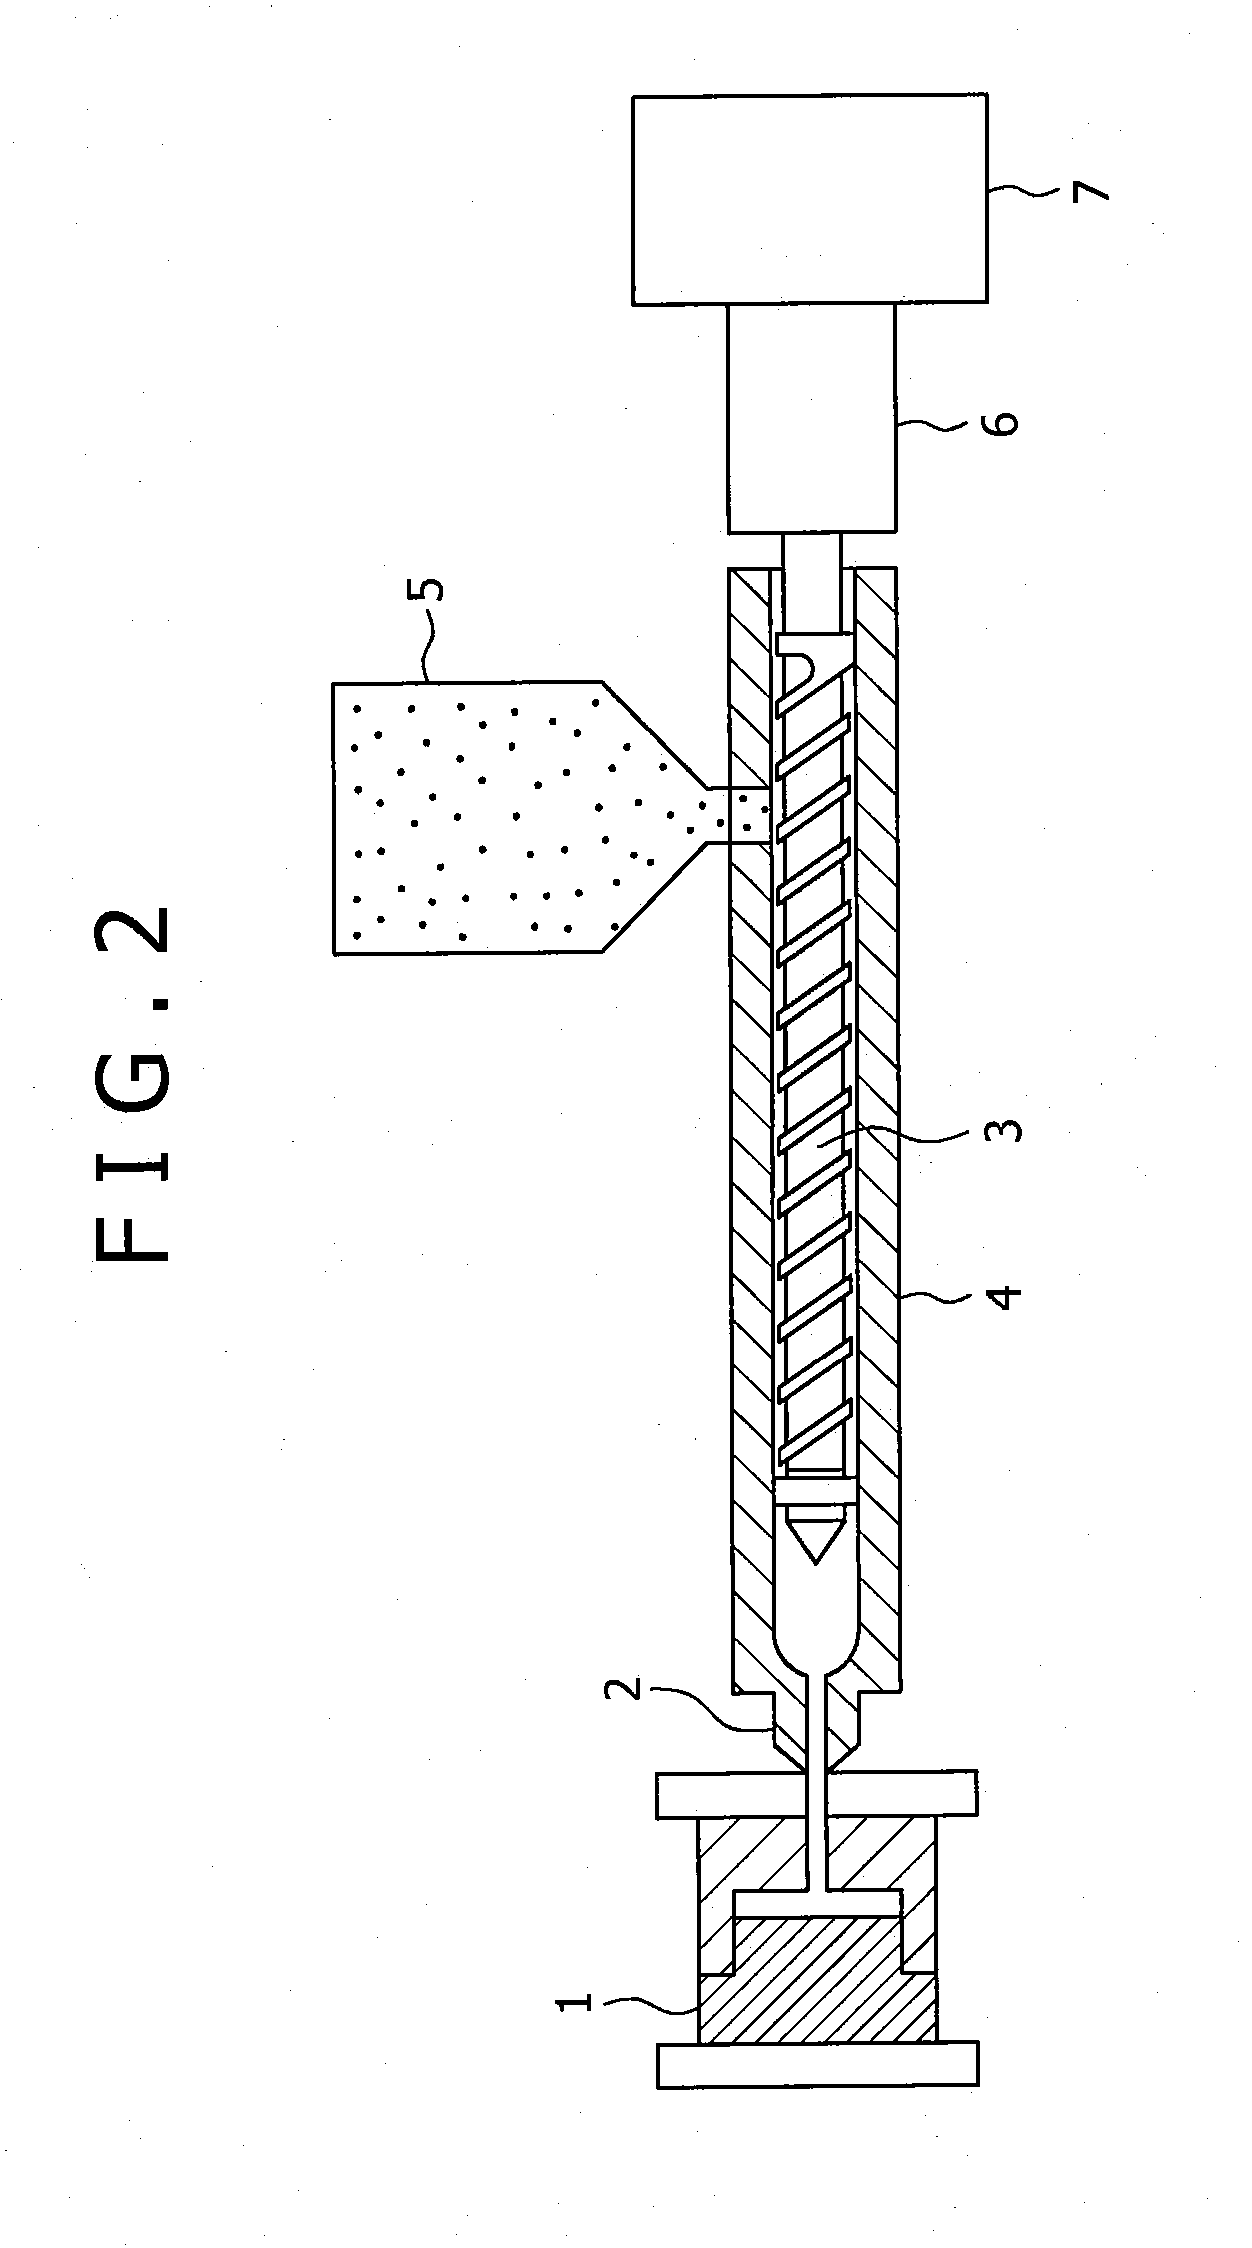 Mold body and method of manufacturing the same